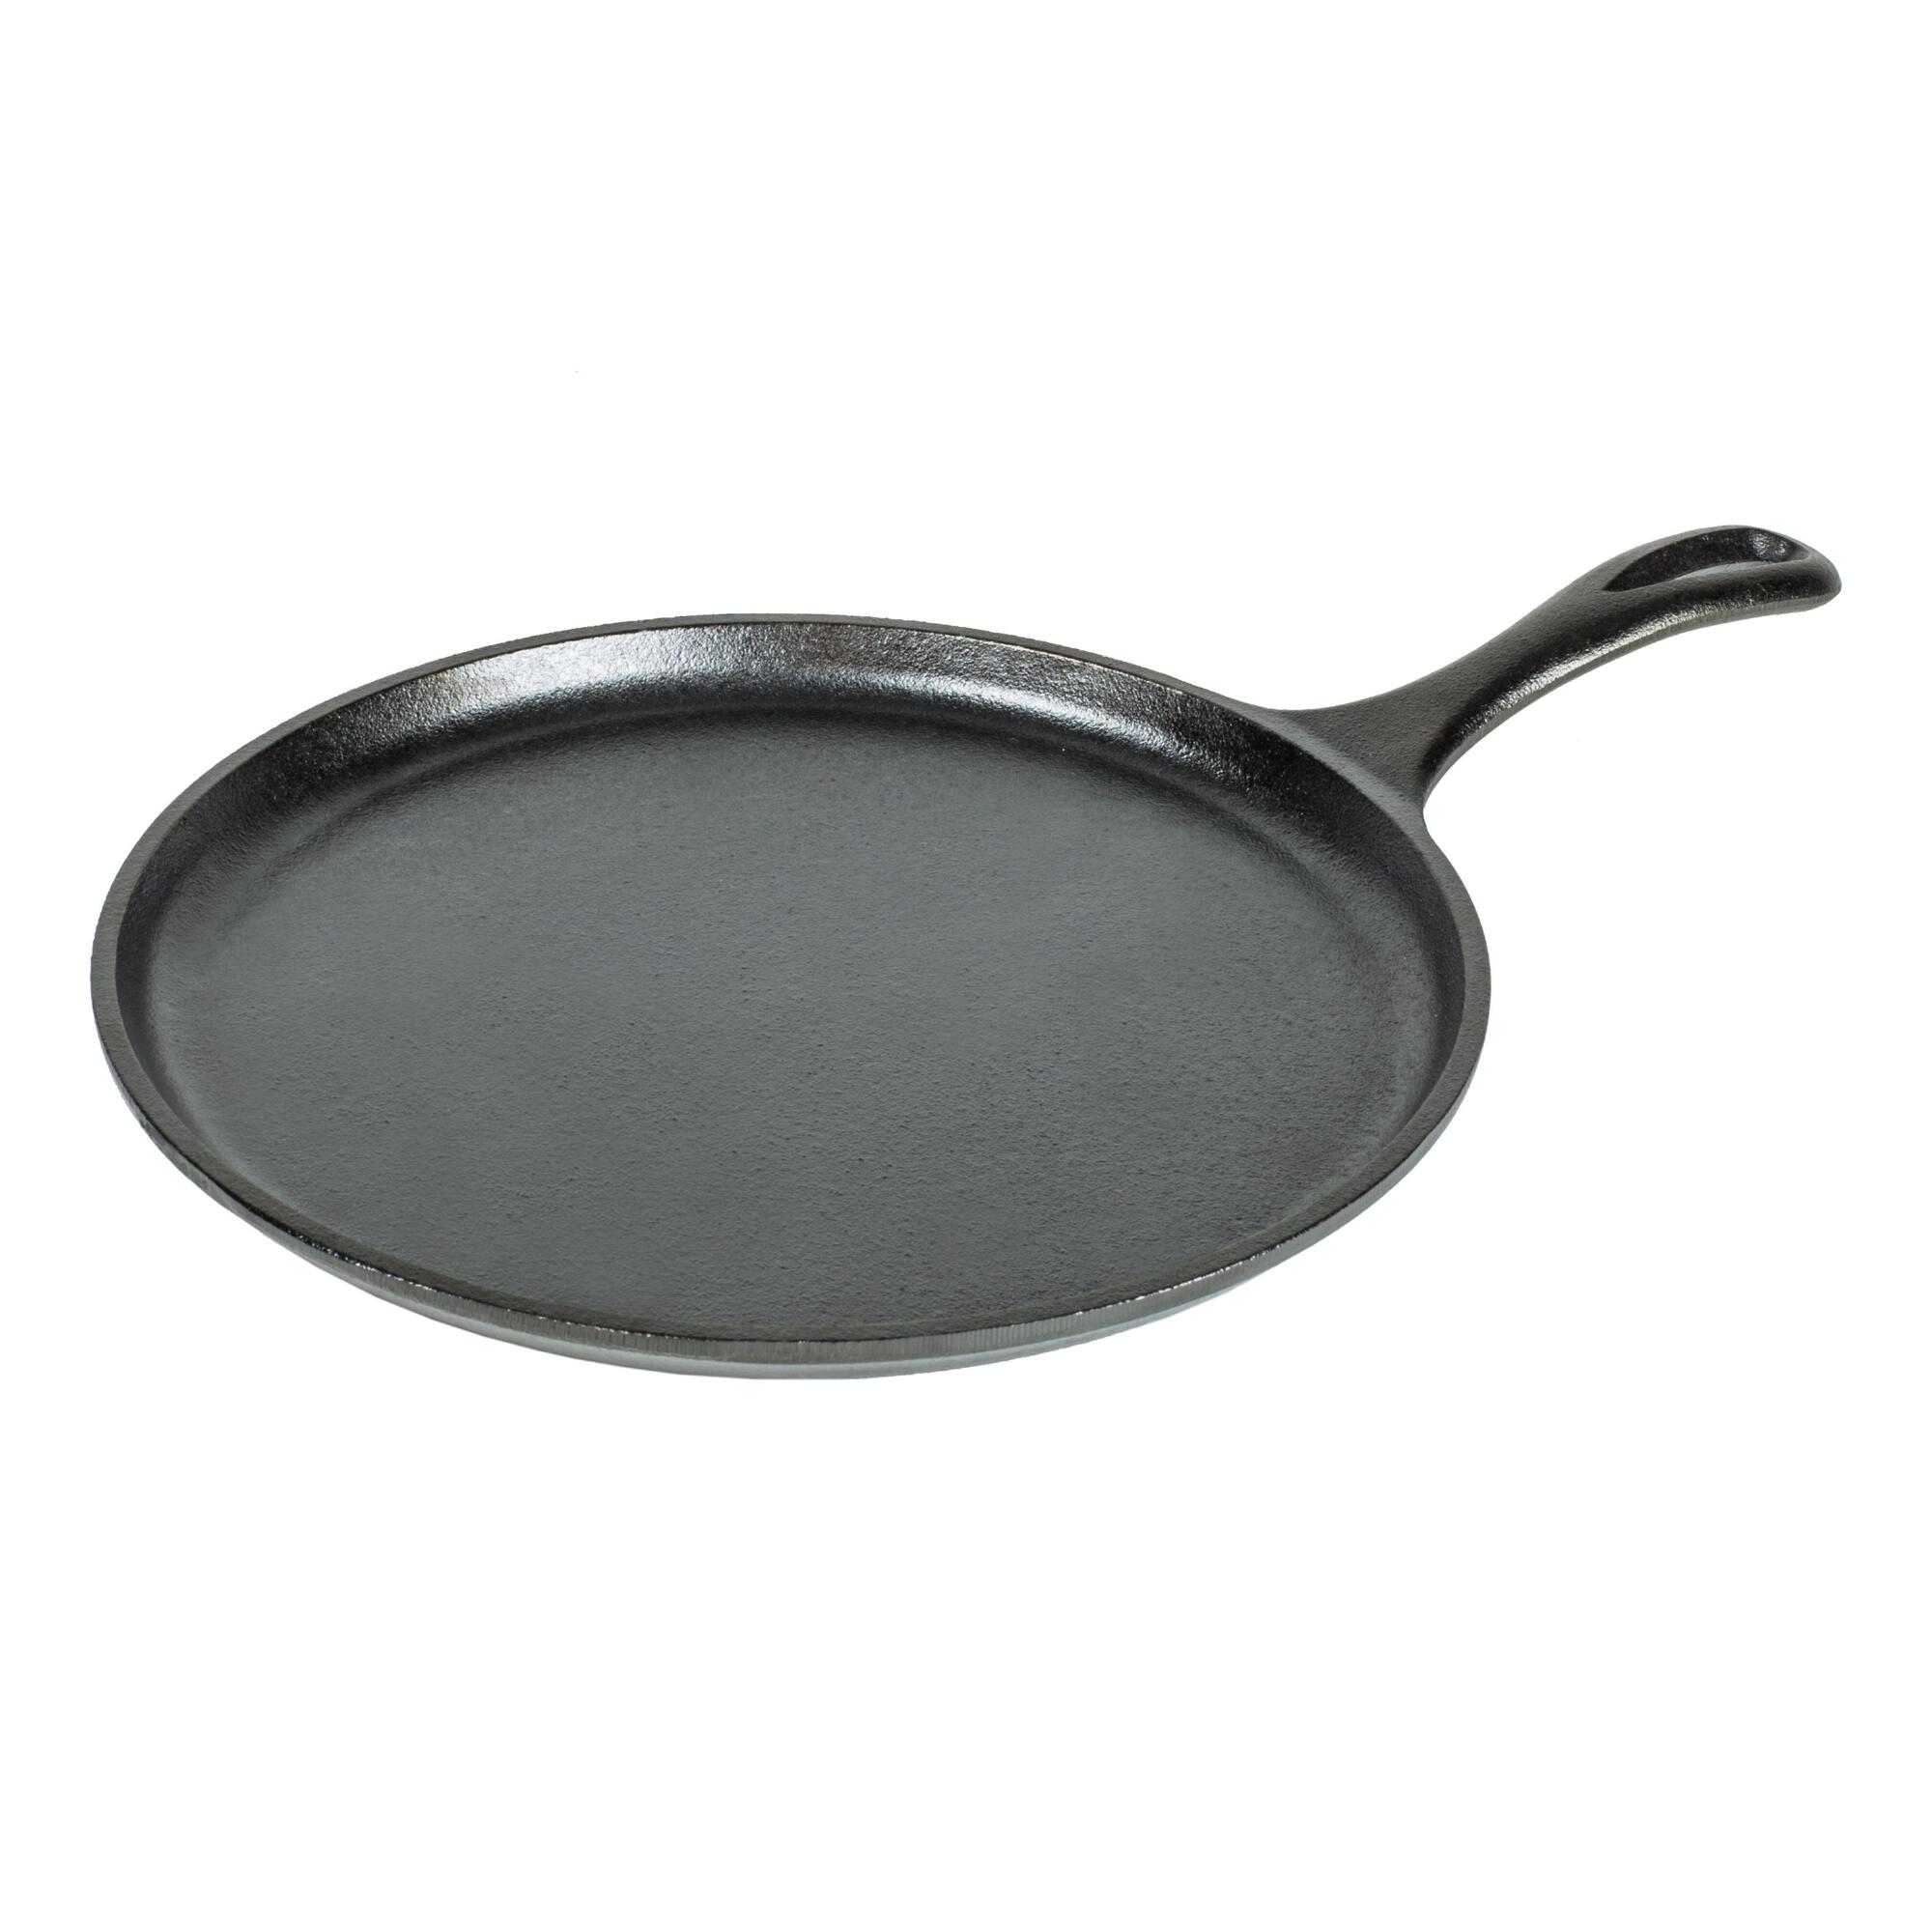 10.5 Inch Round Lodge Cast Iron Griddle by World Market